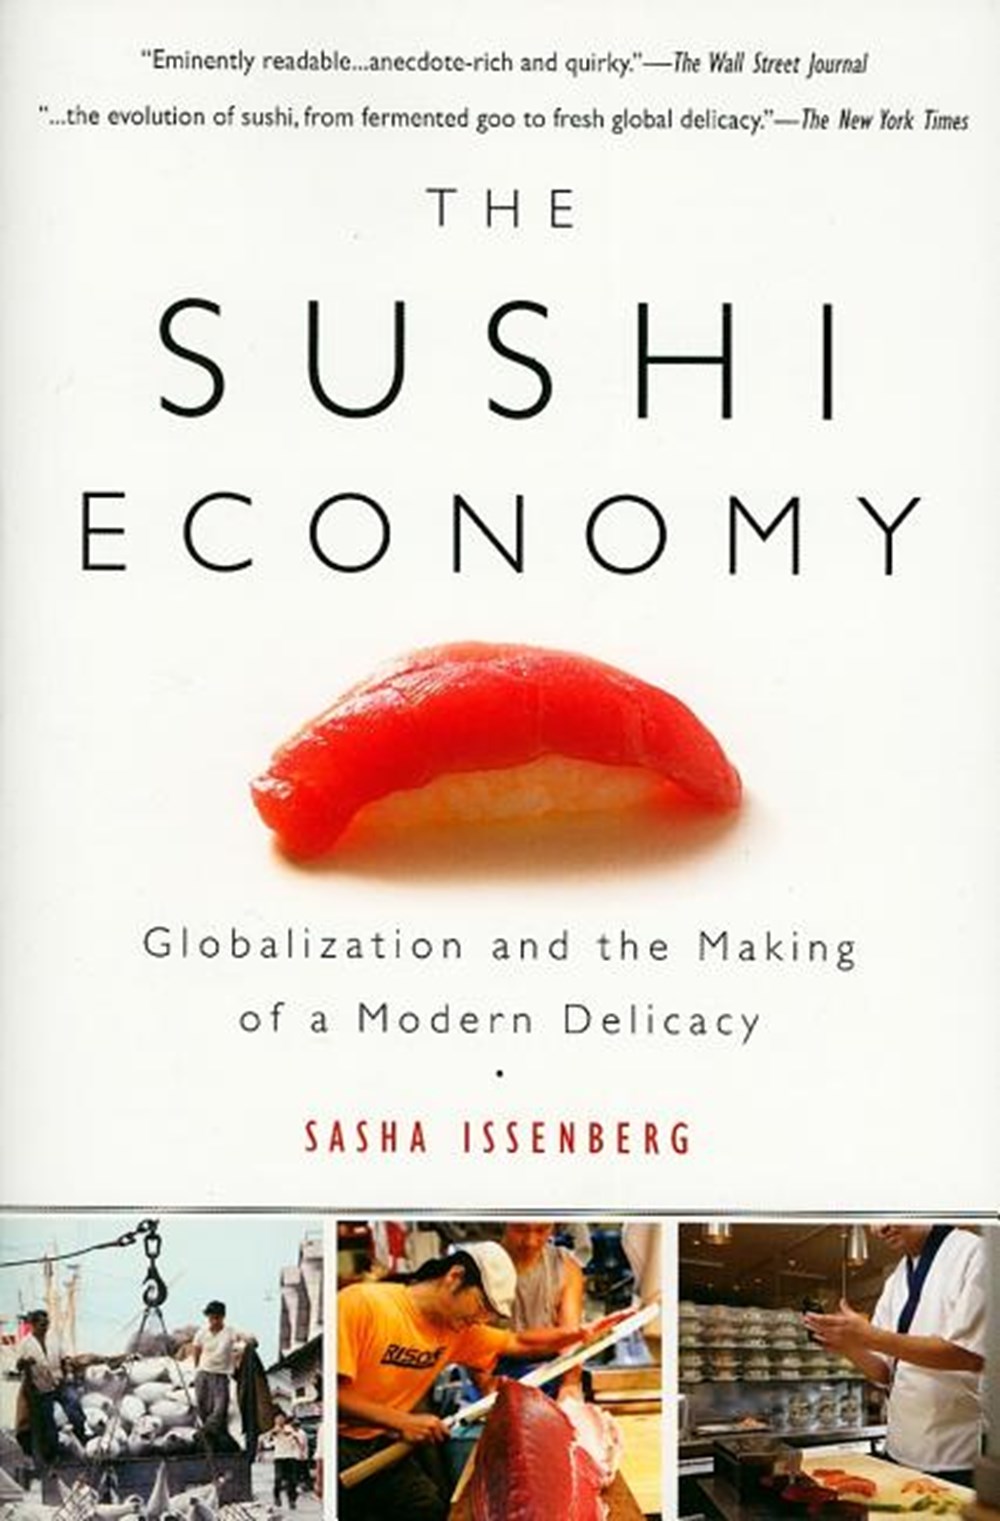 Sushi Economy Globalization and the Making of a Modern Delicacy